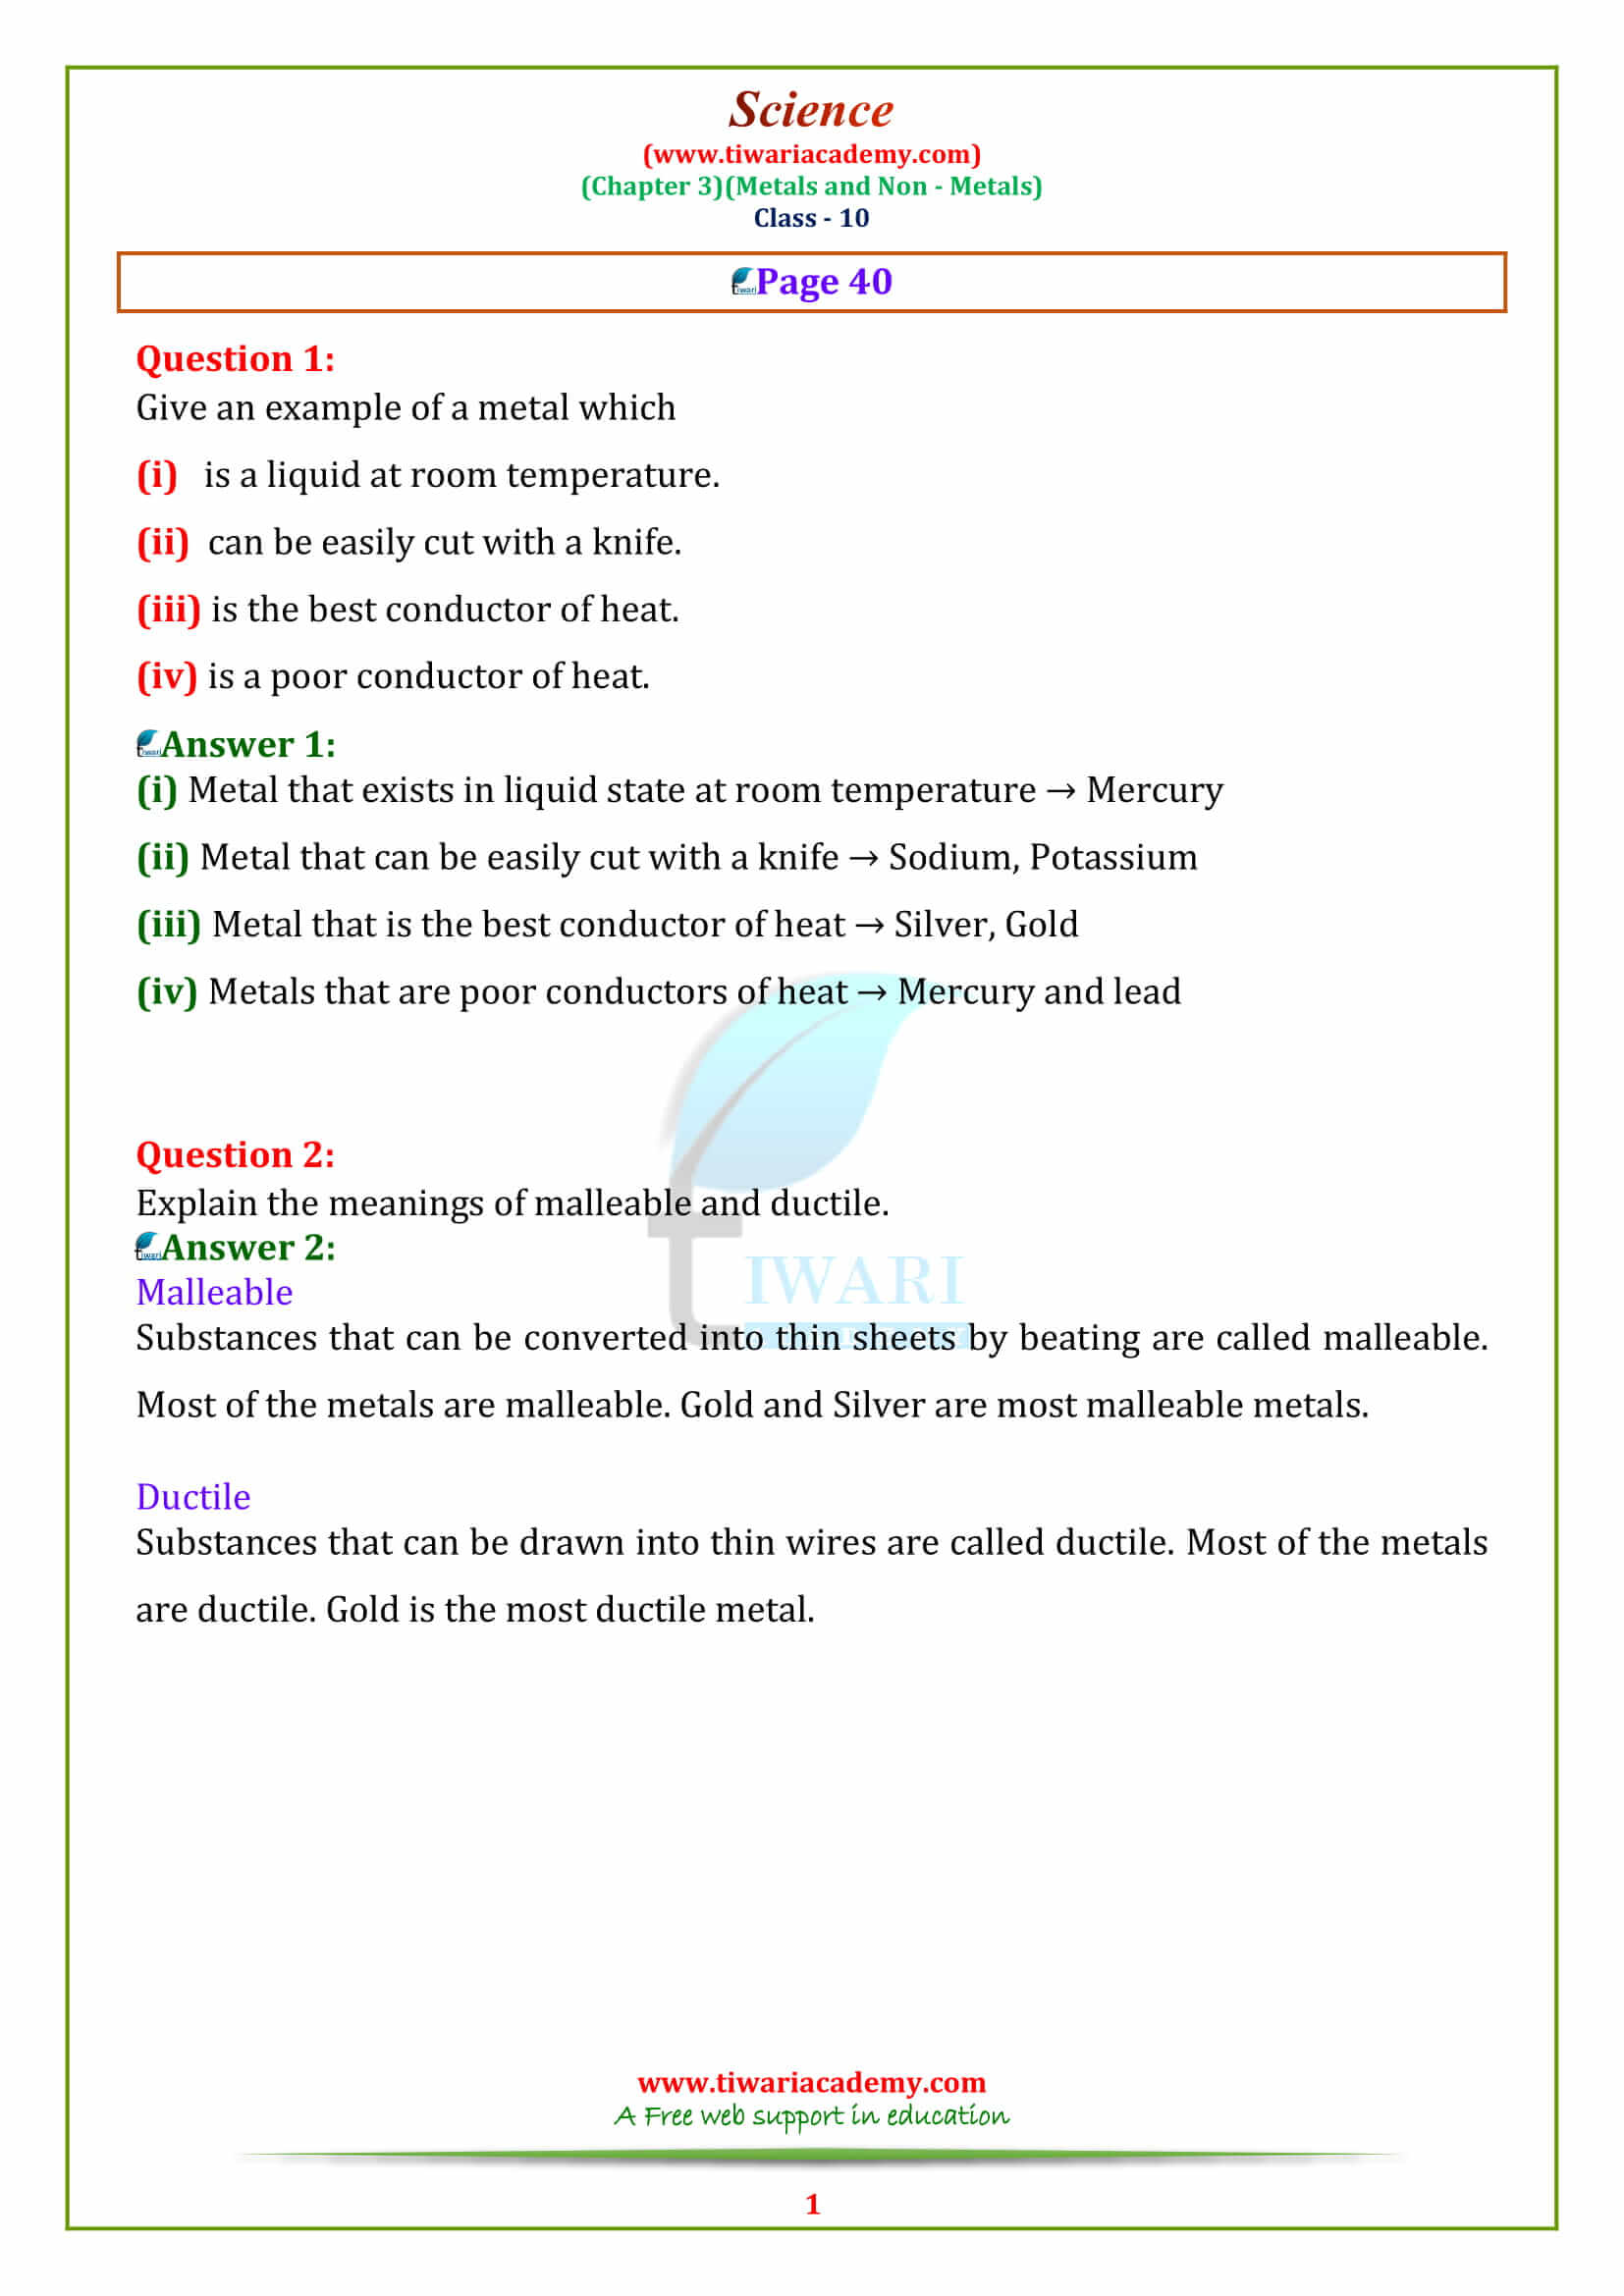 NCERT Solutions for Class 10 Science Chapter 3 Metals and Non-Metals page 40